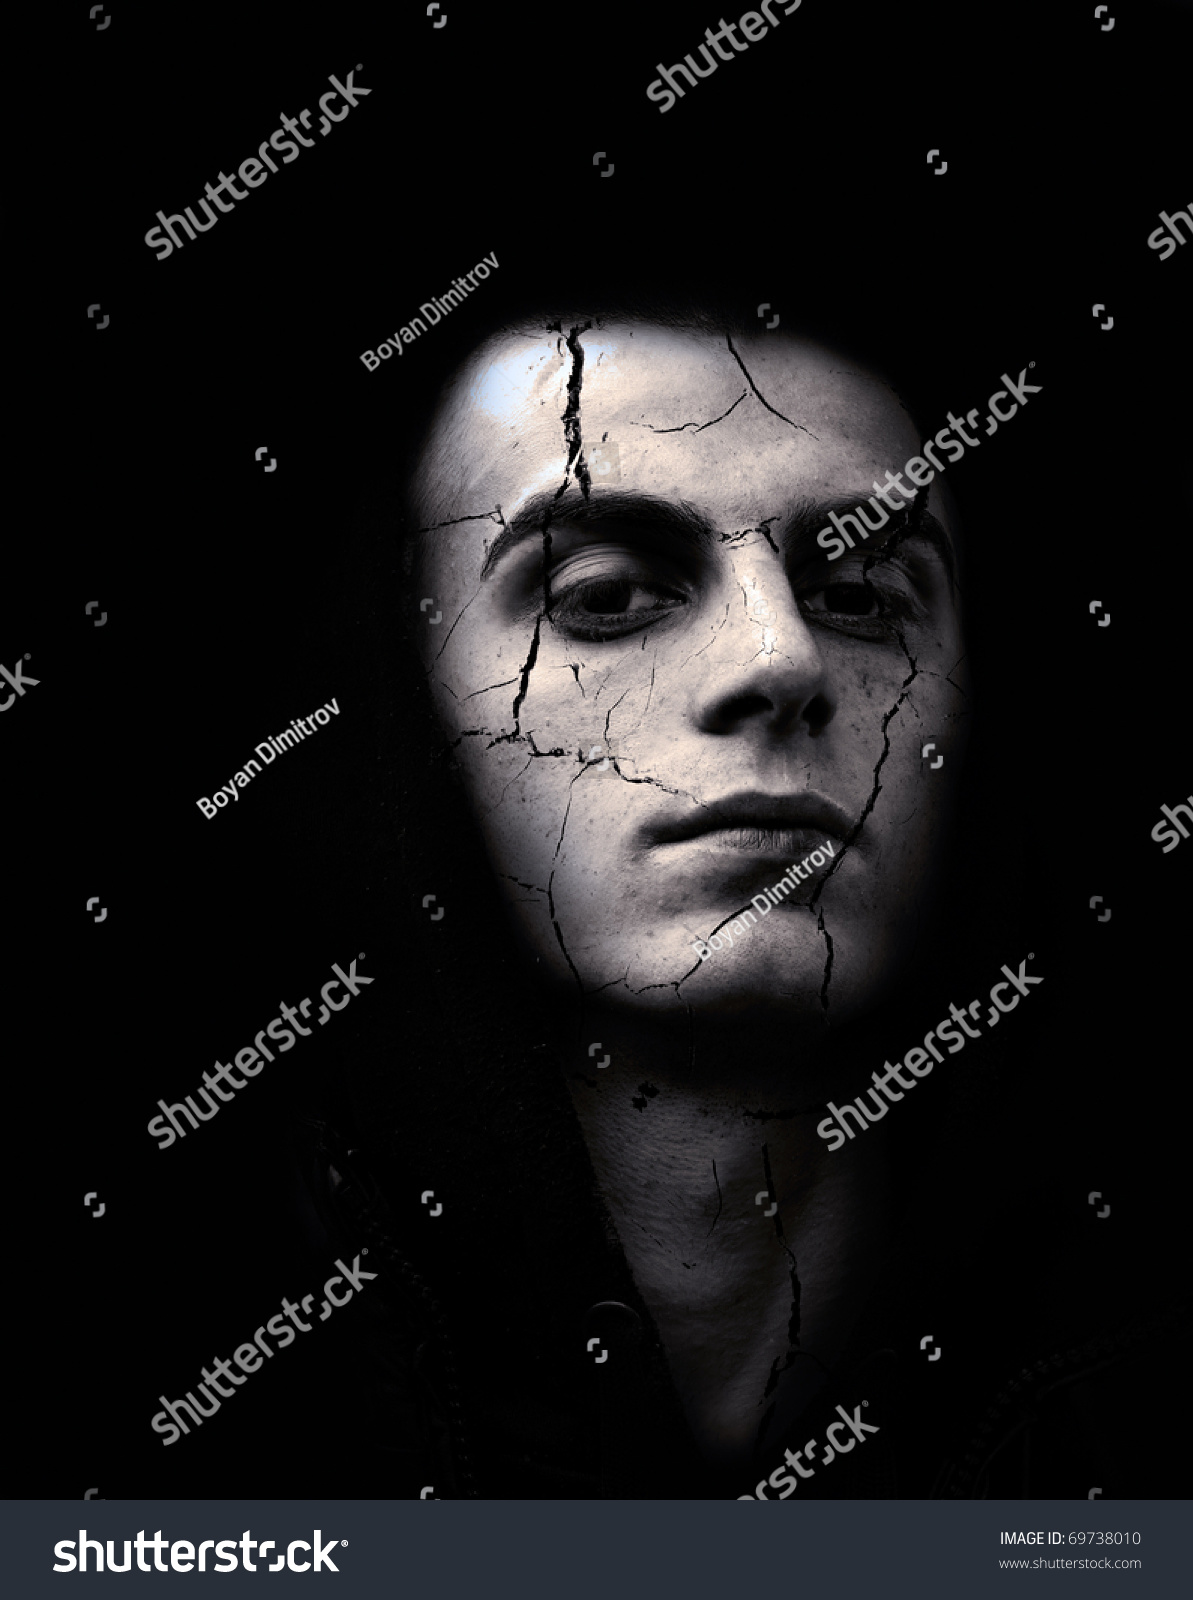 Portrait Sinisterspooky Looking Man Cracked Skin Stock Photo 69738010 ...